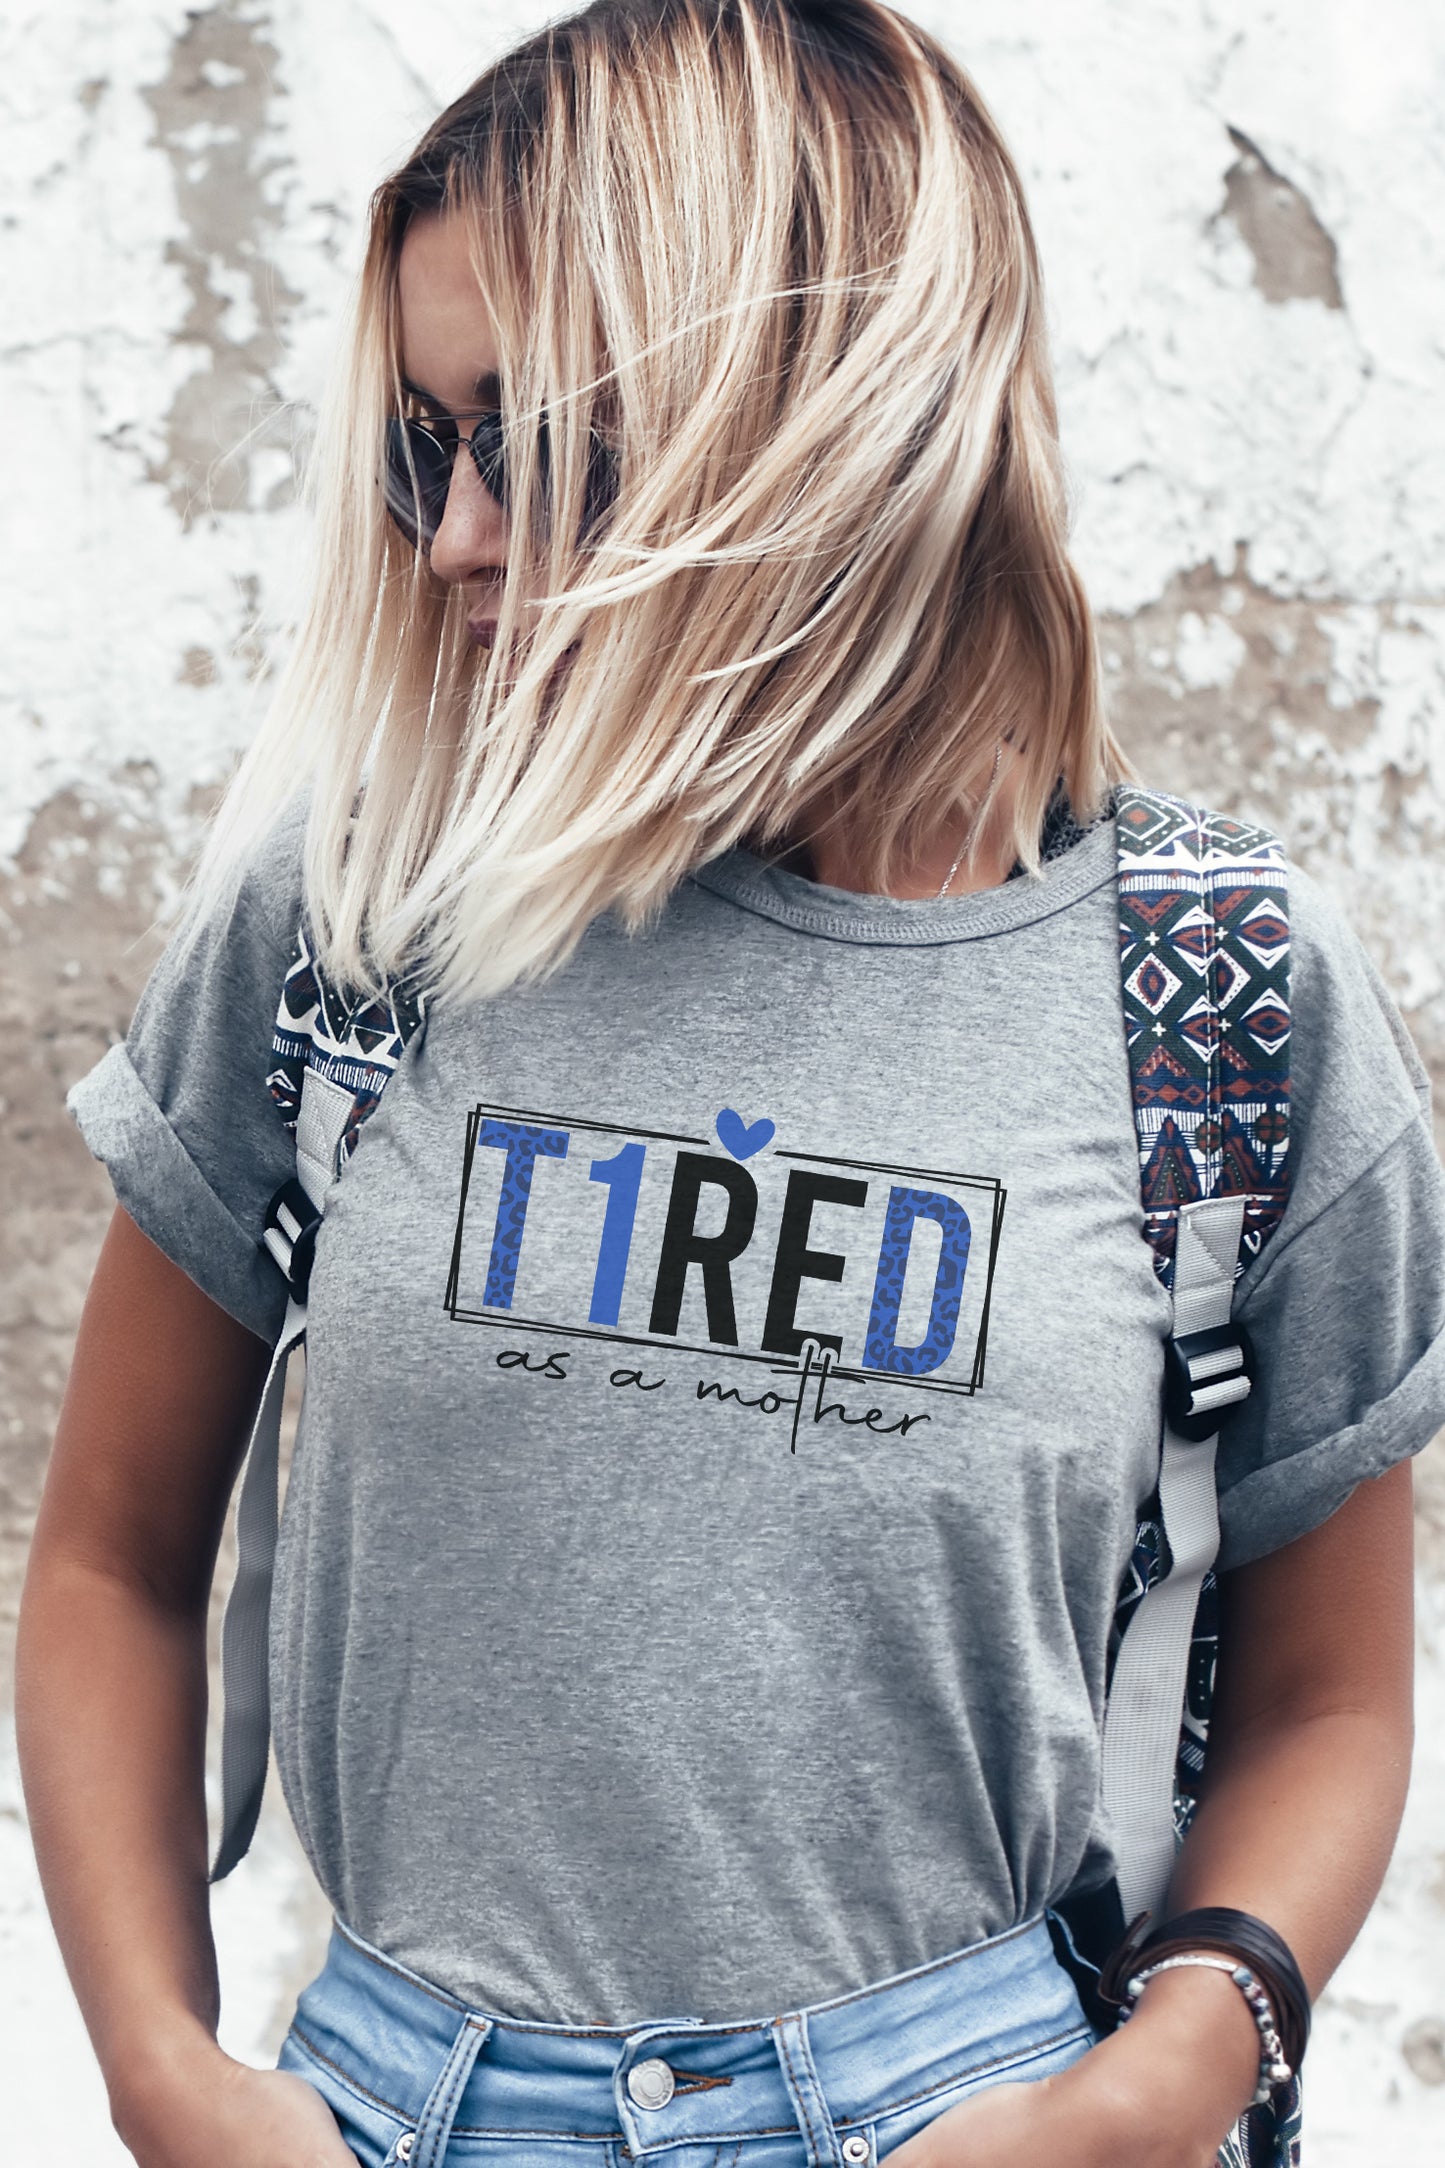 T1red - Tired as a Mother - Unisex T-Shirt